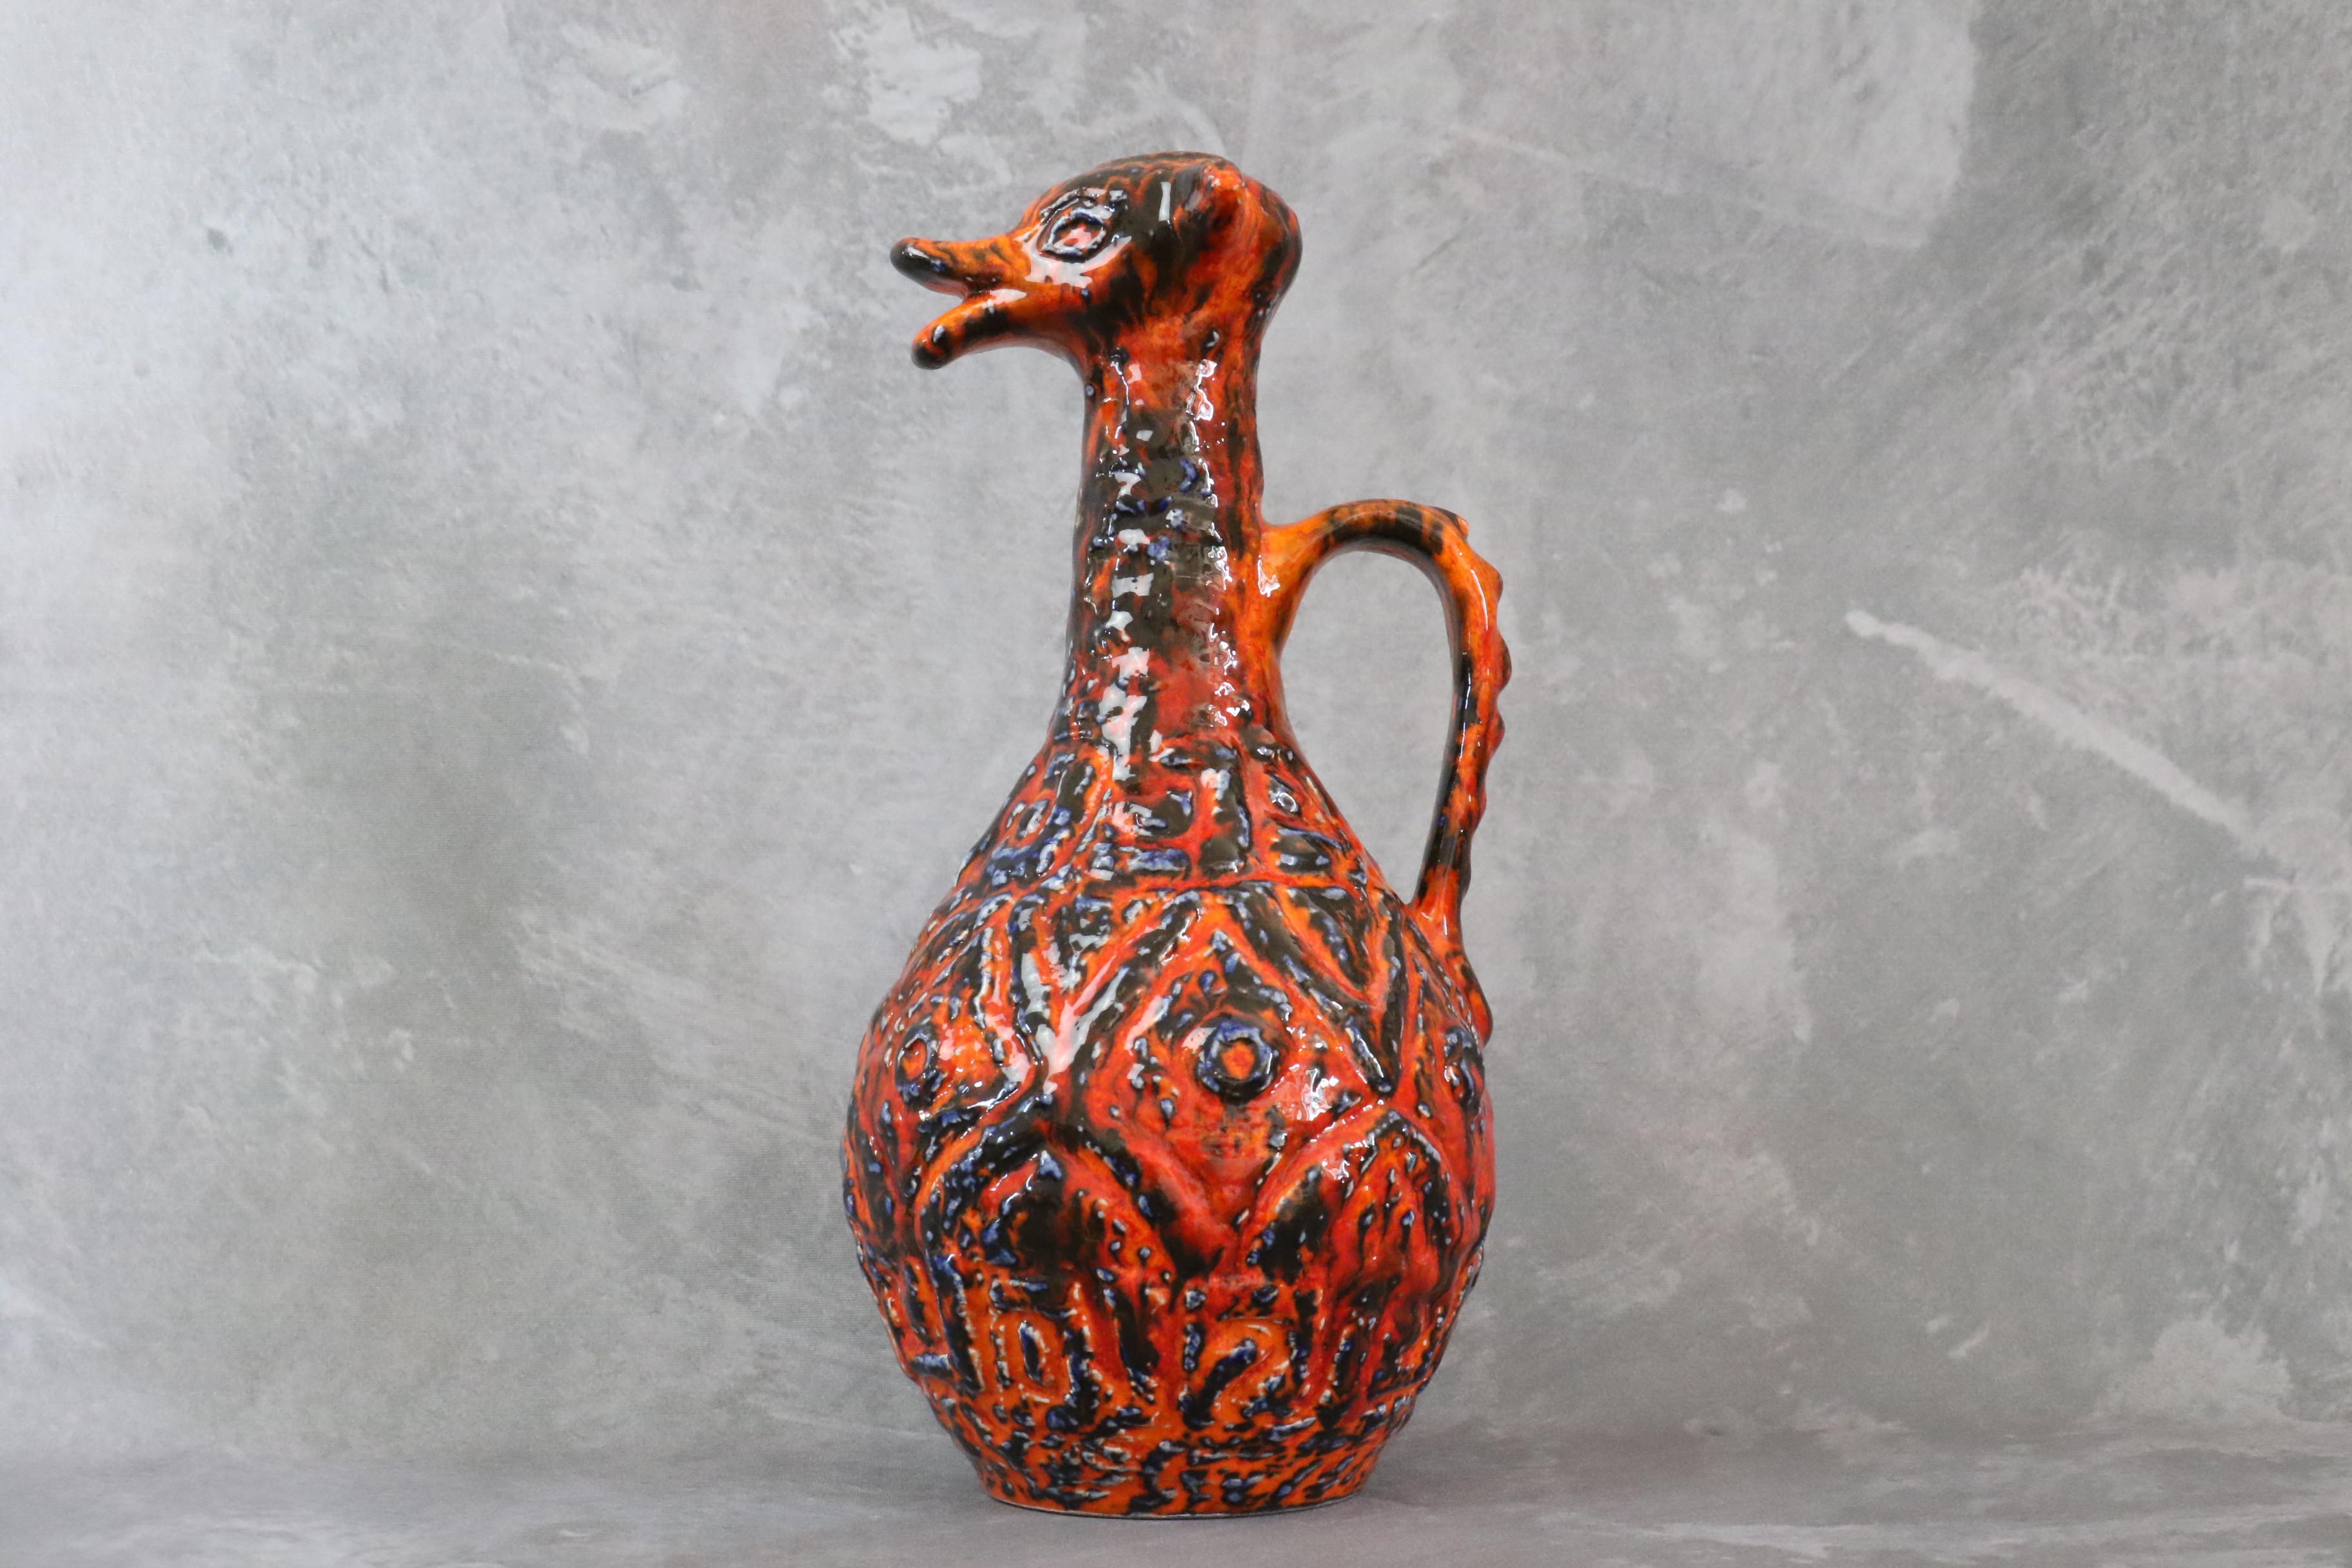 Large zoomorphic vase in red fat lava by JASBA - 1970 - West Germany ceramics

Superb zoomorphic vase by the JASBA workshop in red fat lava. This is a rare piece. It is an eye-catcher with its vivid color and geometric motifs. This vase will blend